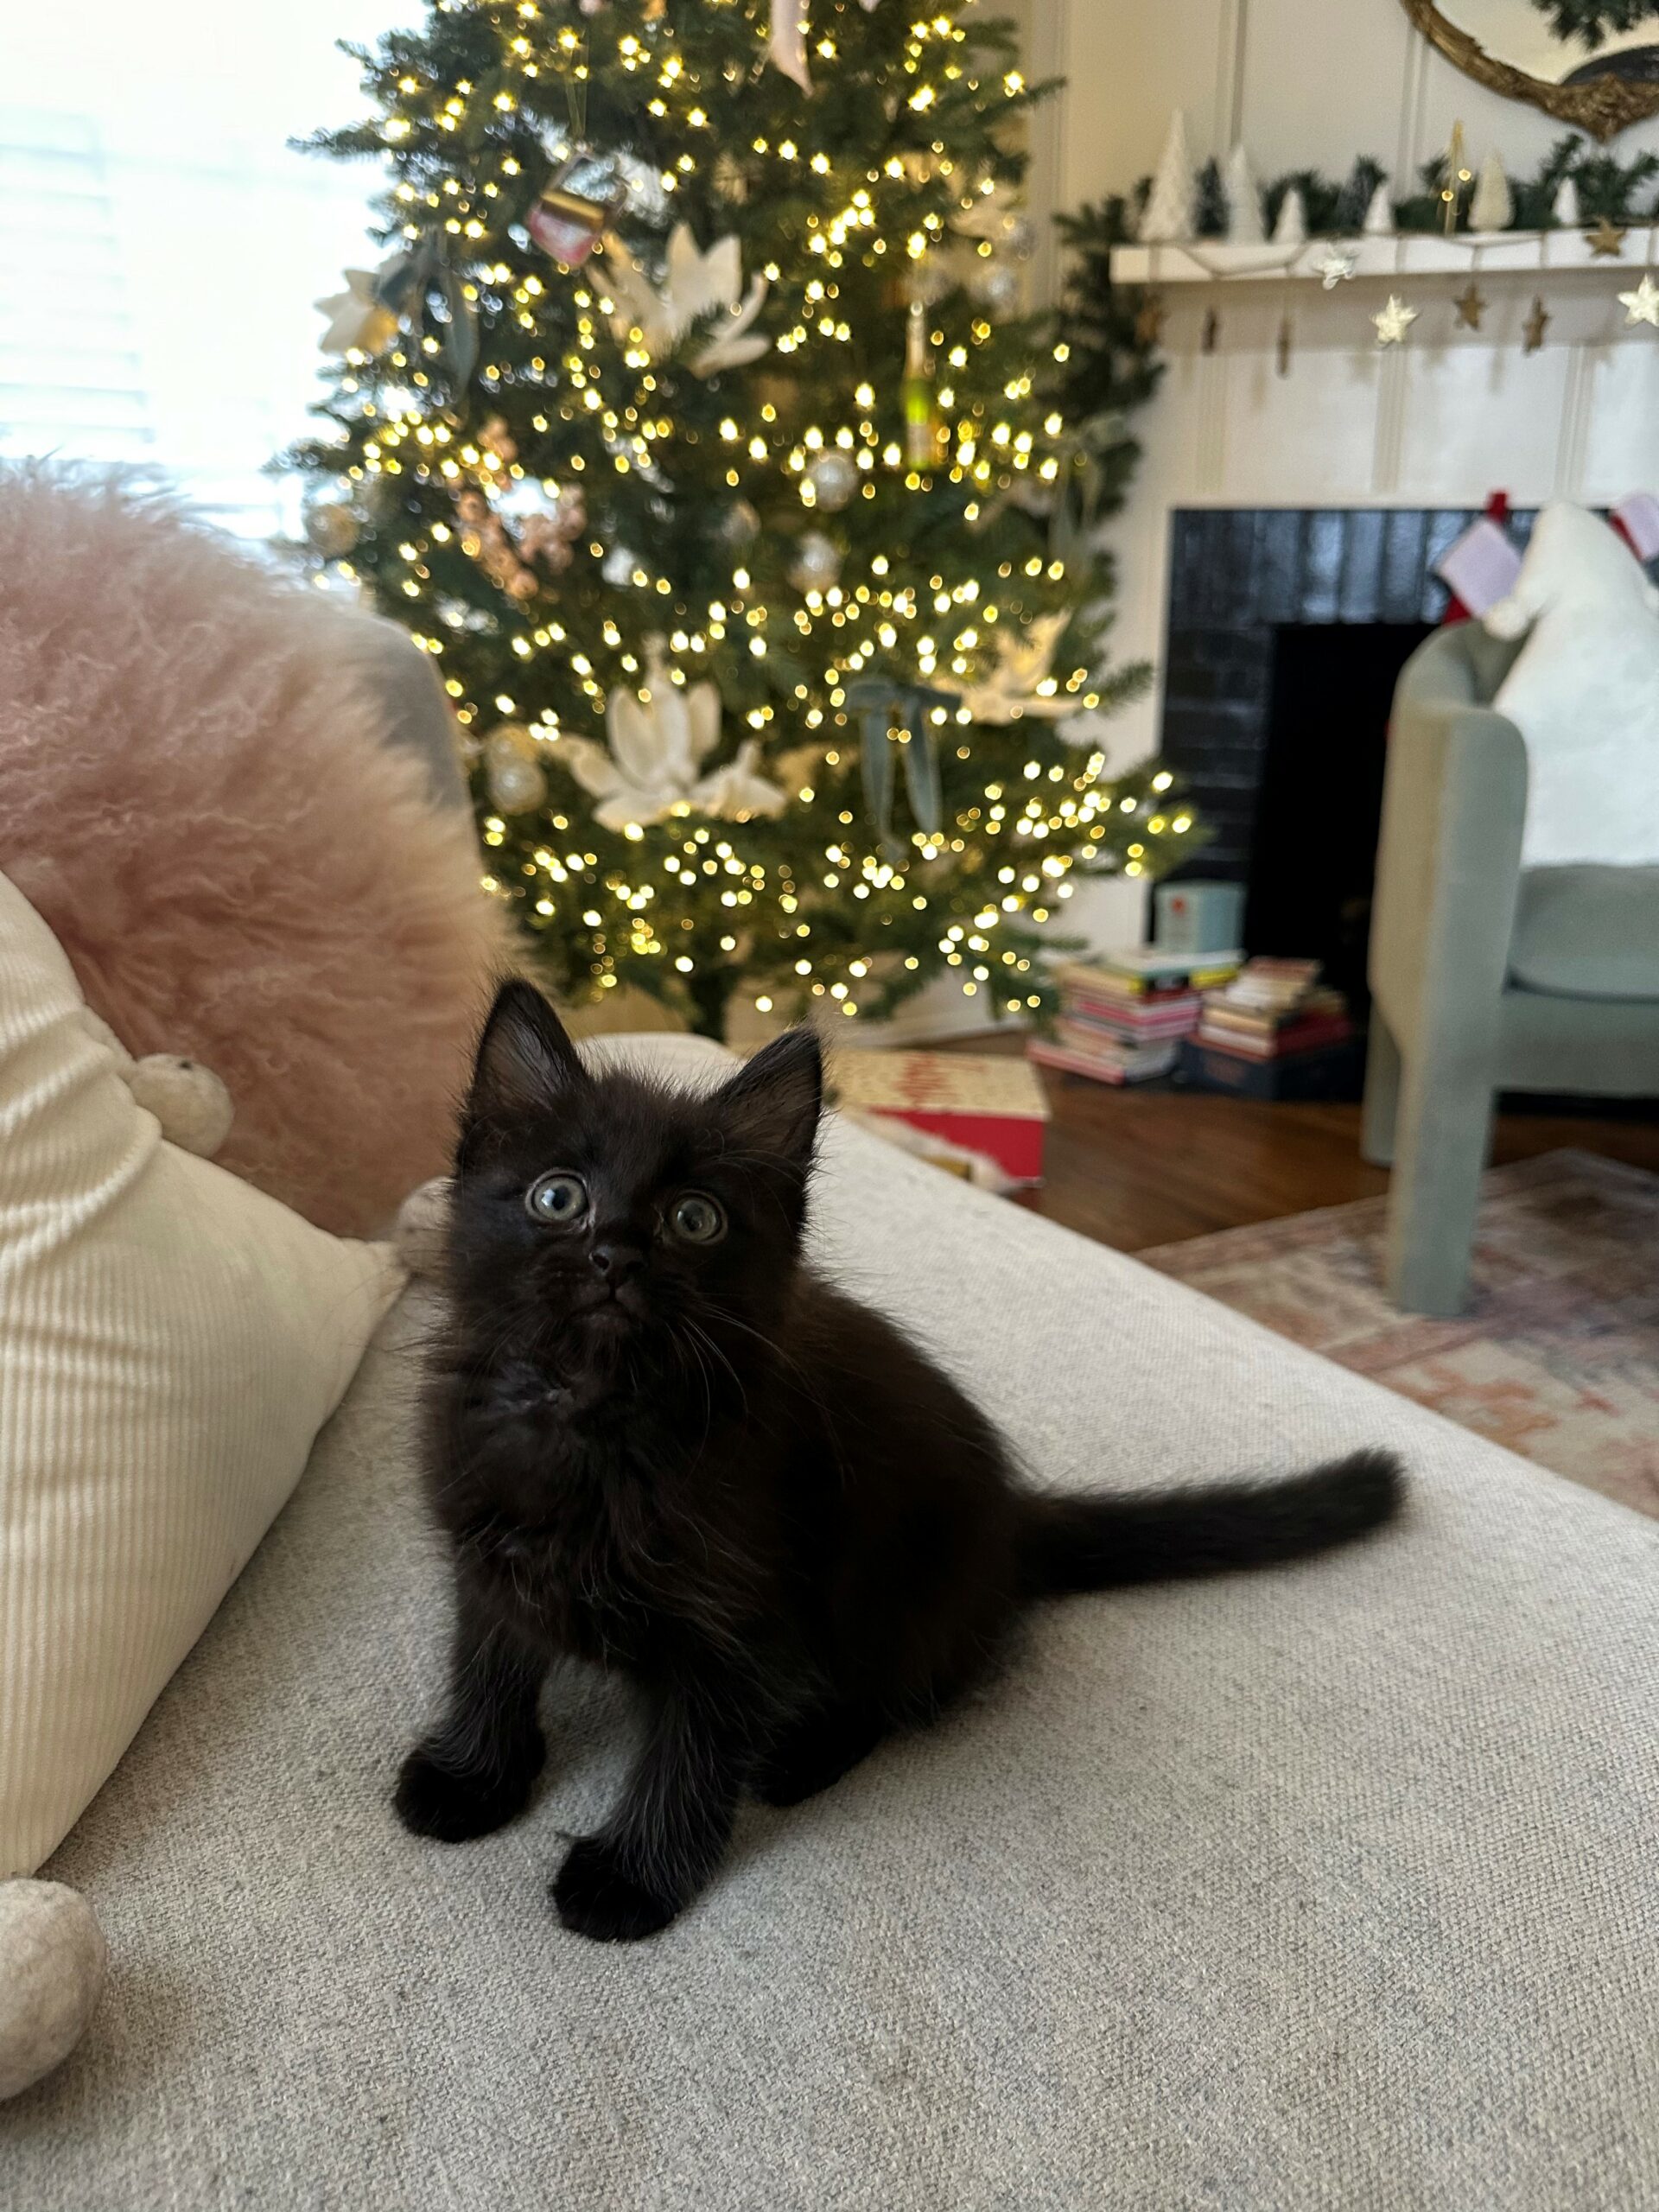 Pinot's Story: from Scaredy Cat to Snuggly Cat - A.R.F.-Animal Rescue  Foundation